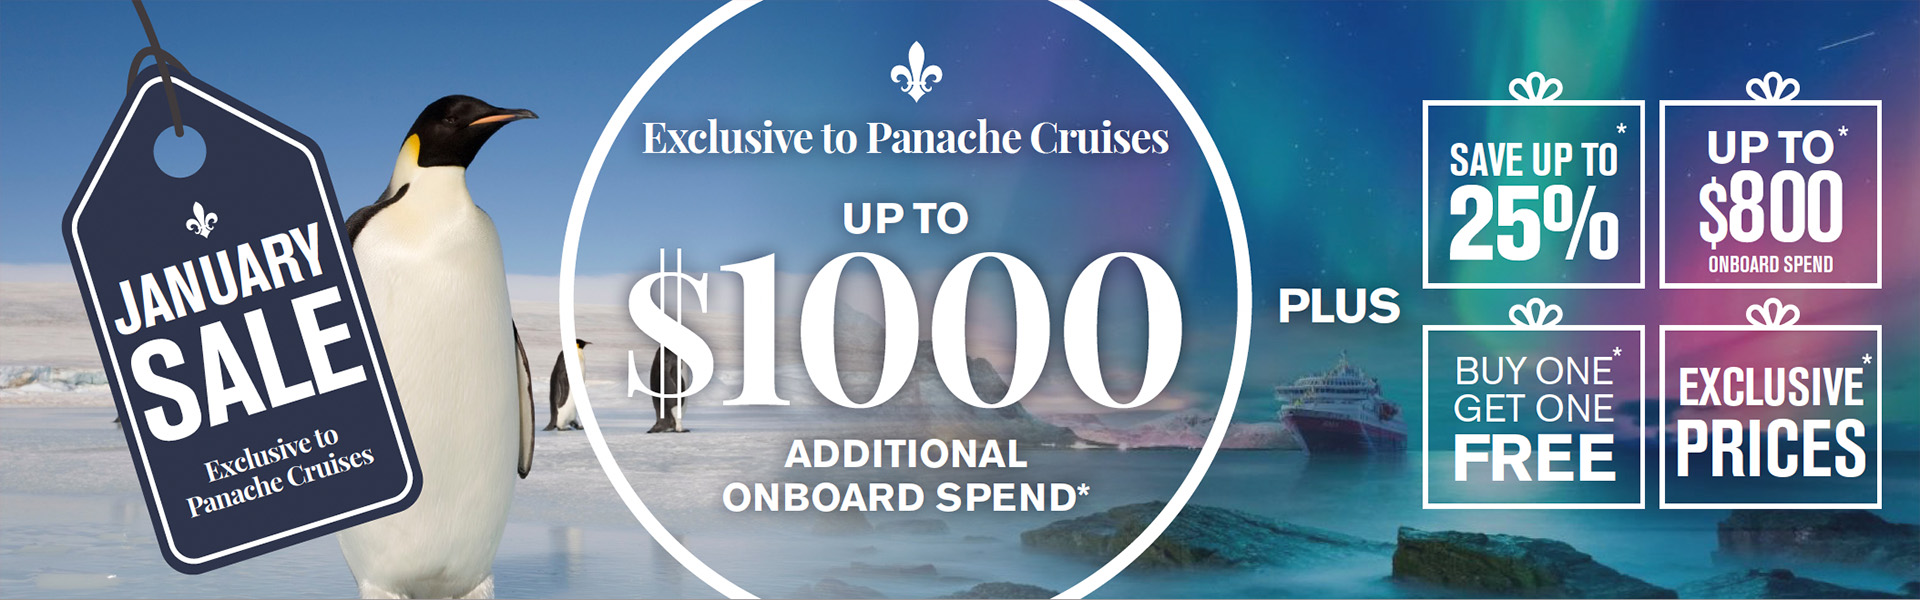 Expedition Cruise Sale